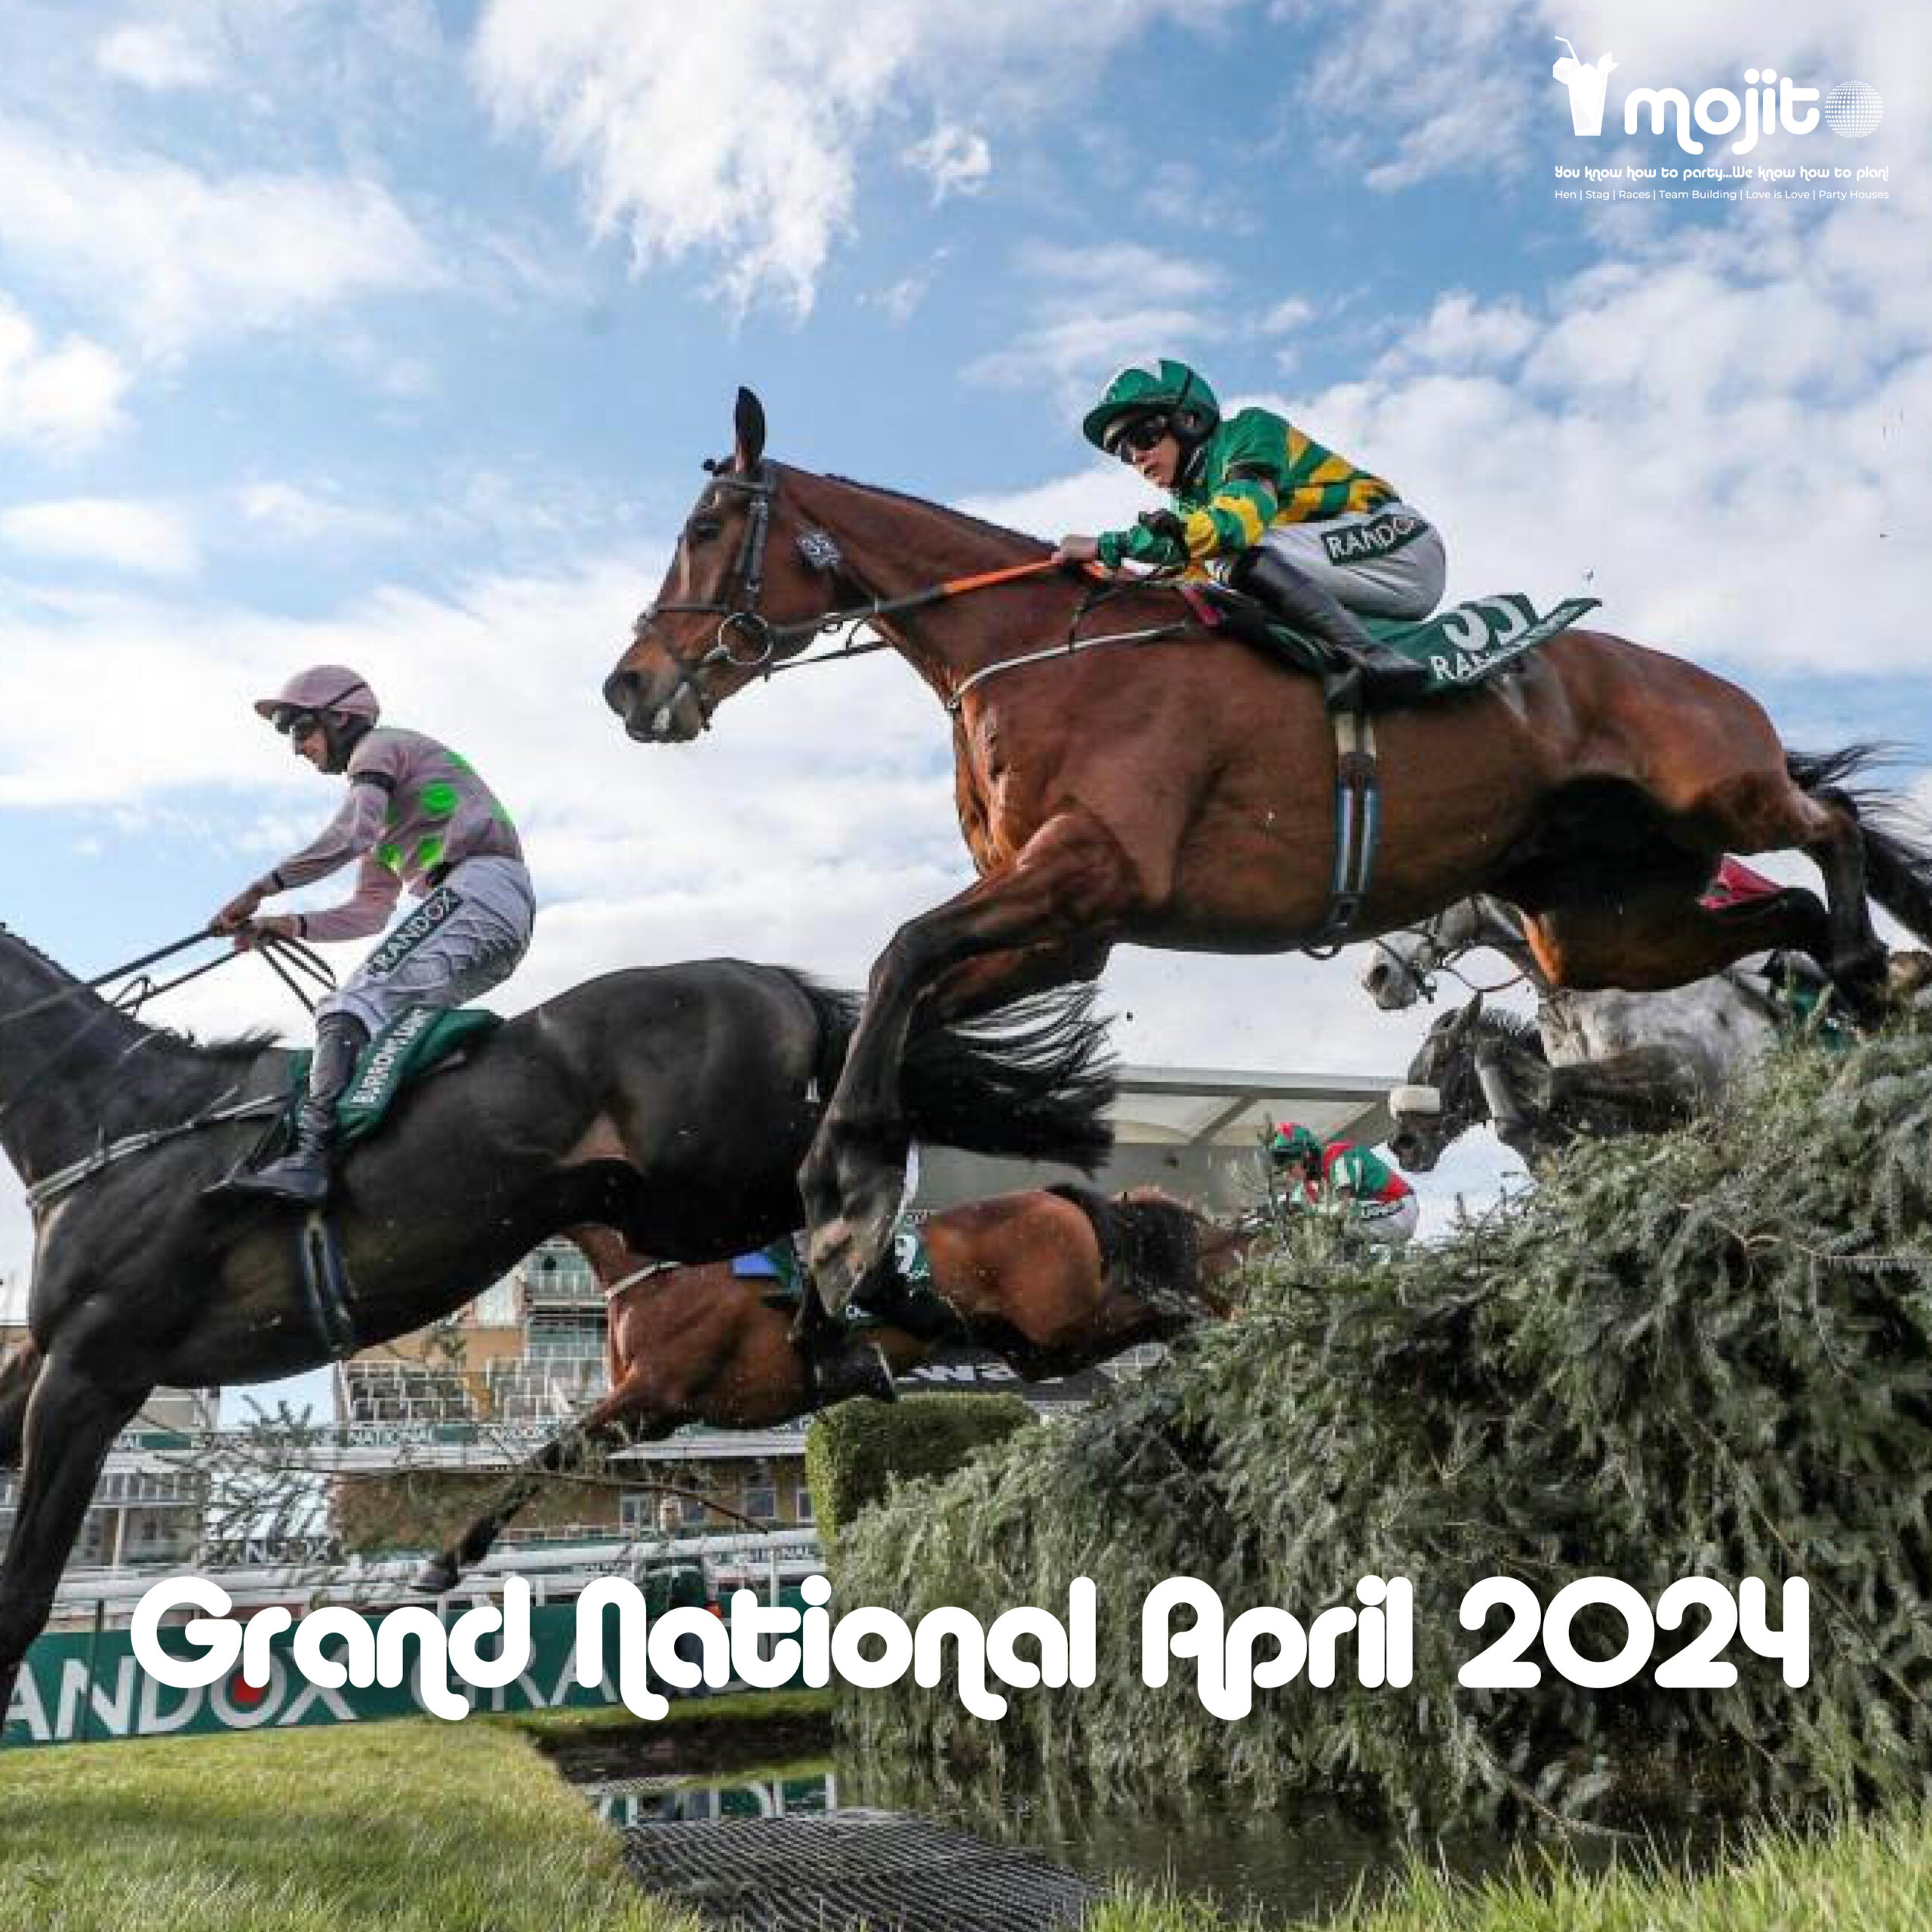 AINTREE GRAND NATIONAL 2024 An Amazing Two Night VIP Races Package